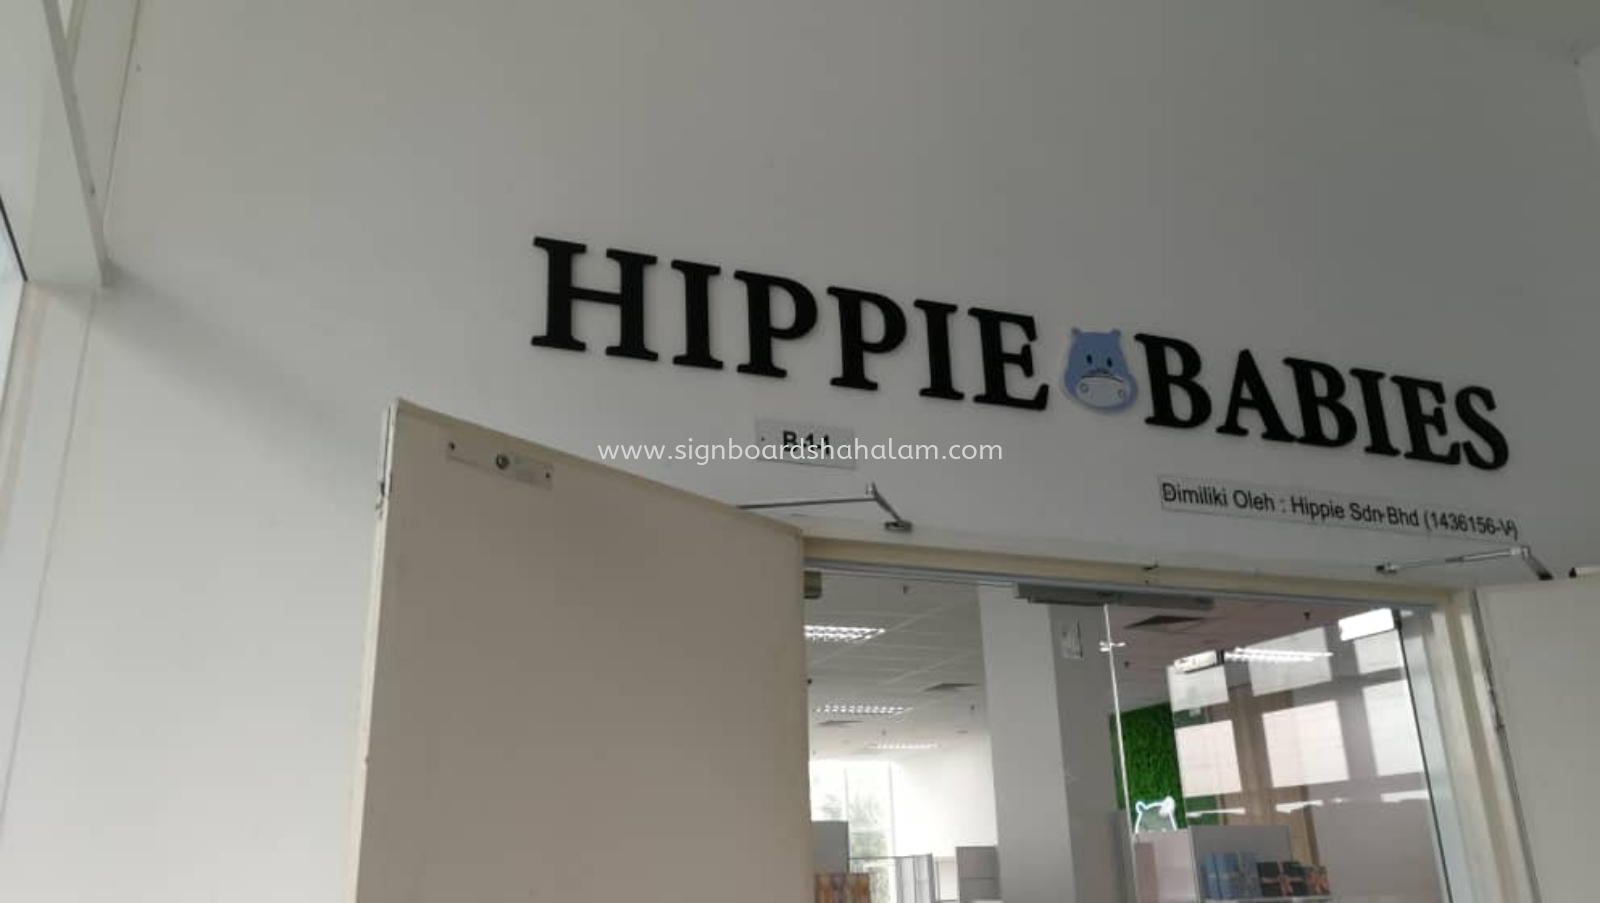 Hippie Sdn Bhd Klang - 3D Box Up Lettering Or Logo